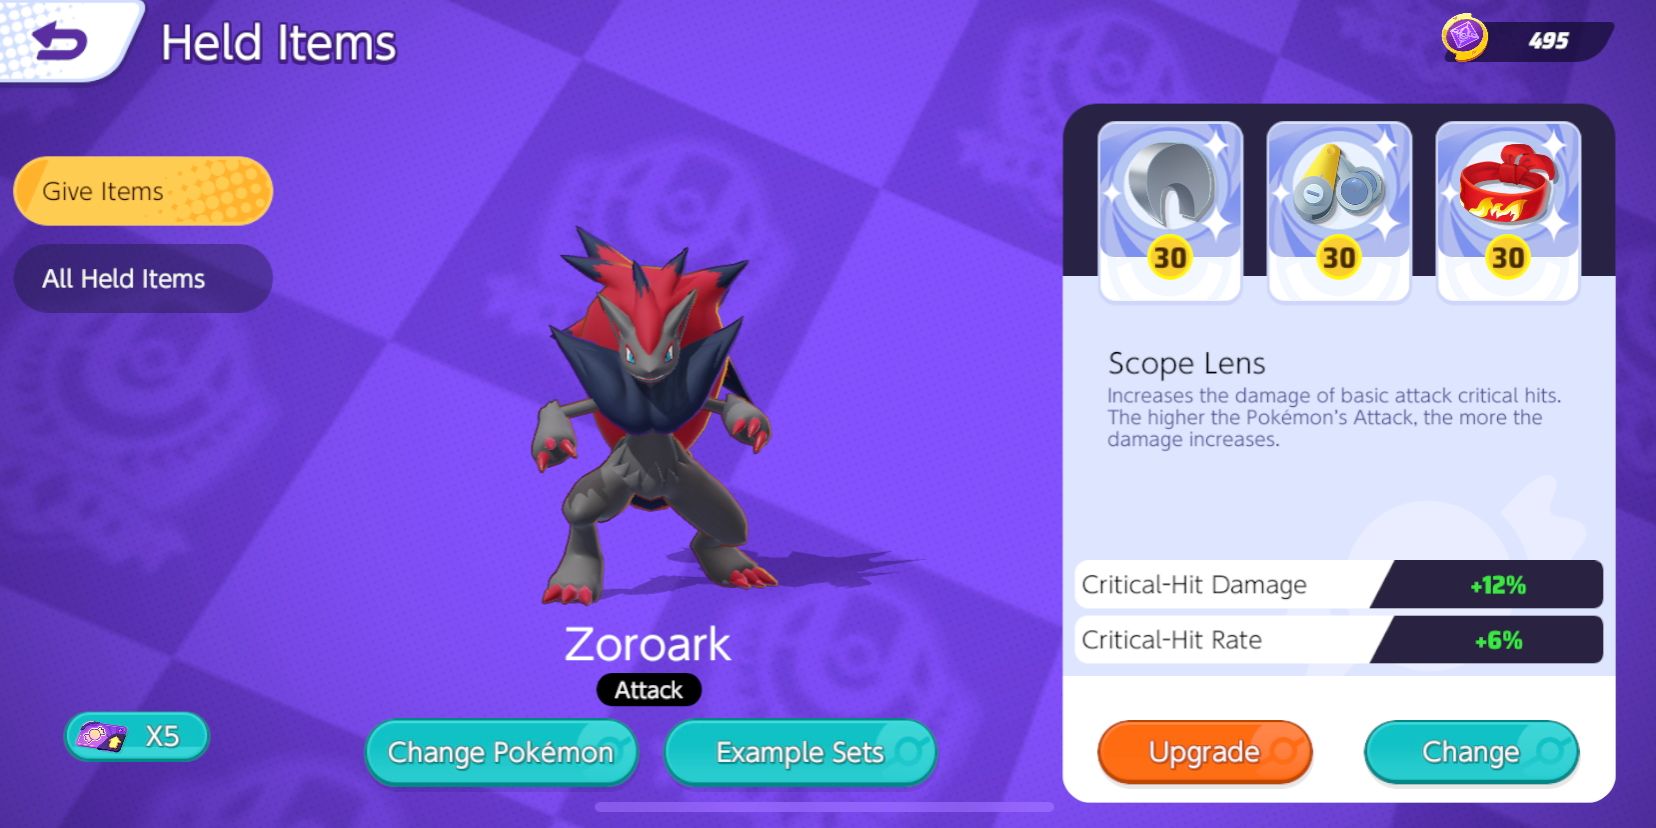 Zoroark Held Item selection screen with Razor Claw, Scope Lens, and Focus Band selected